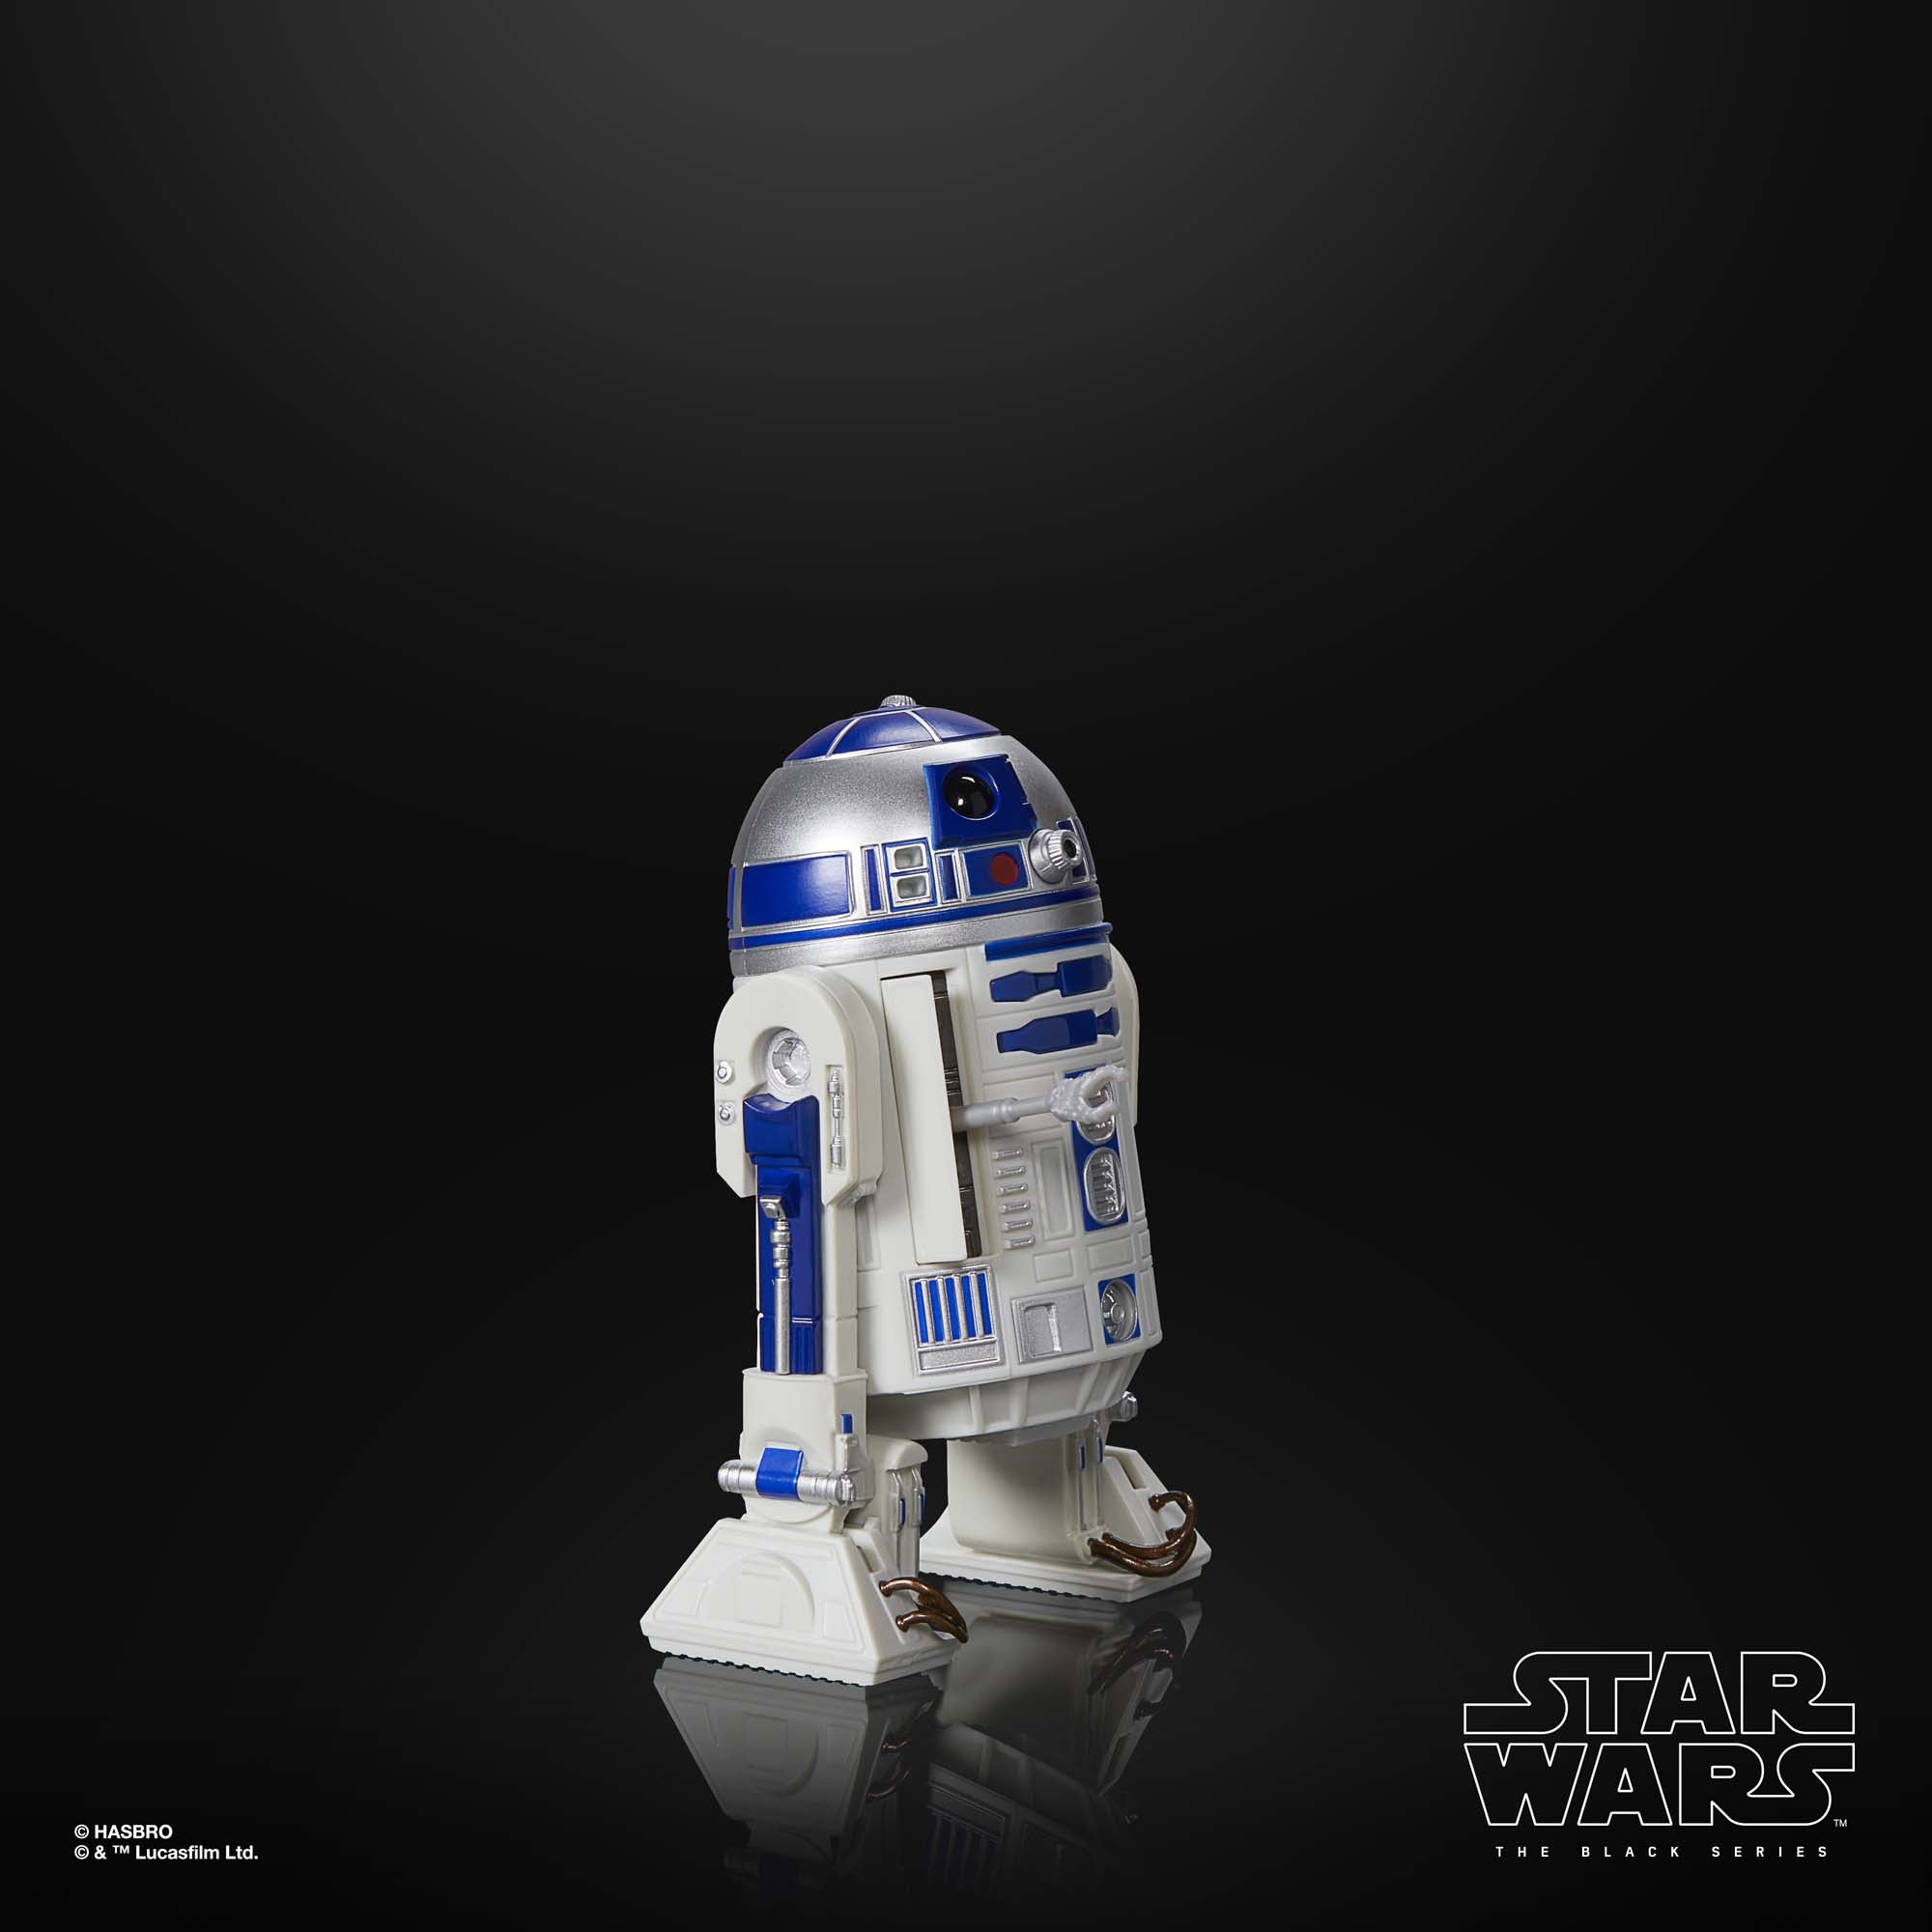 R2-D2 from Star Wars Series